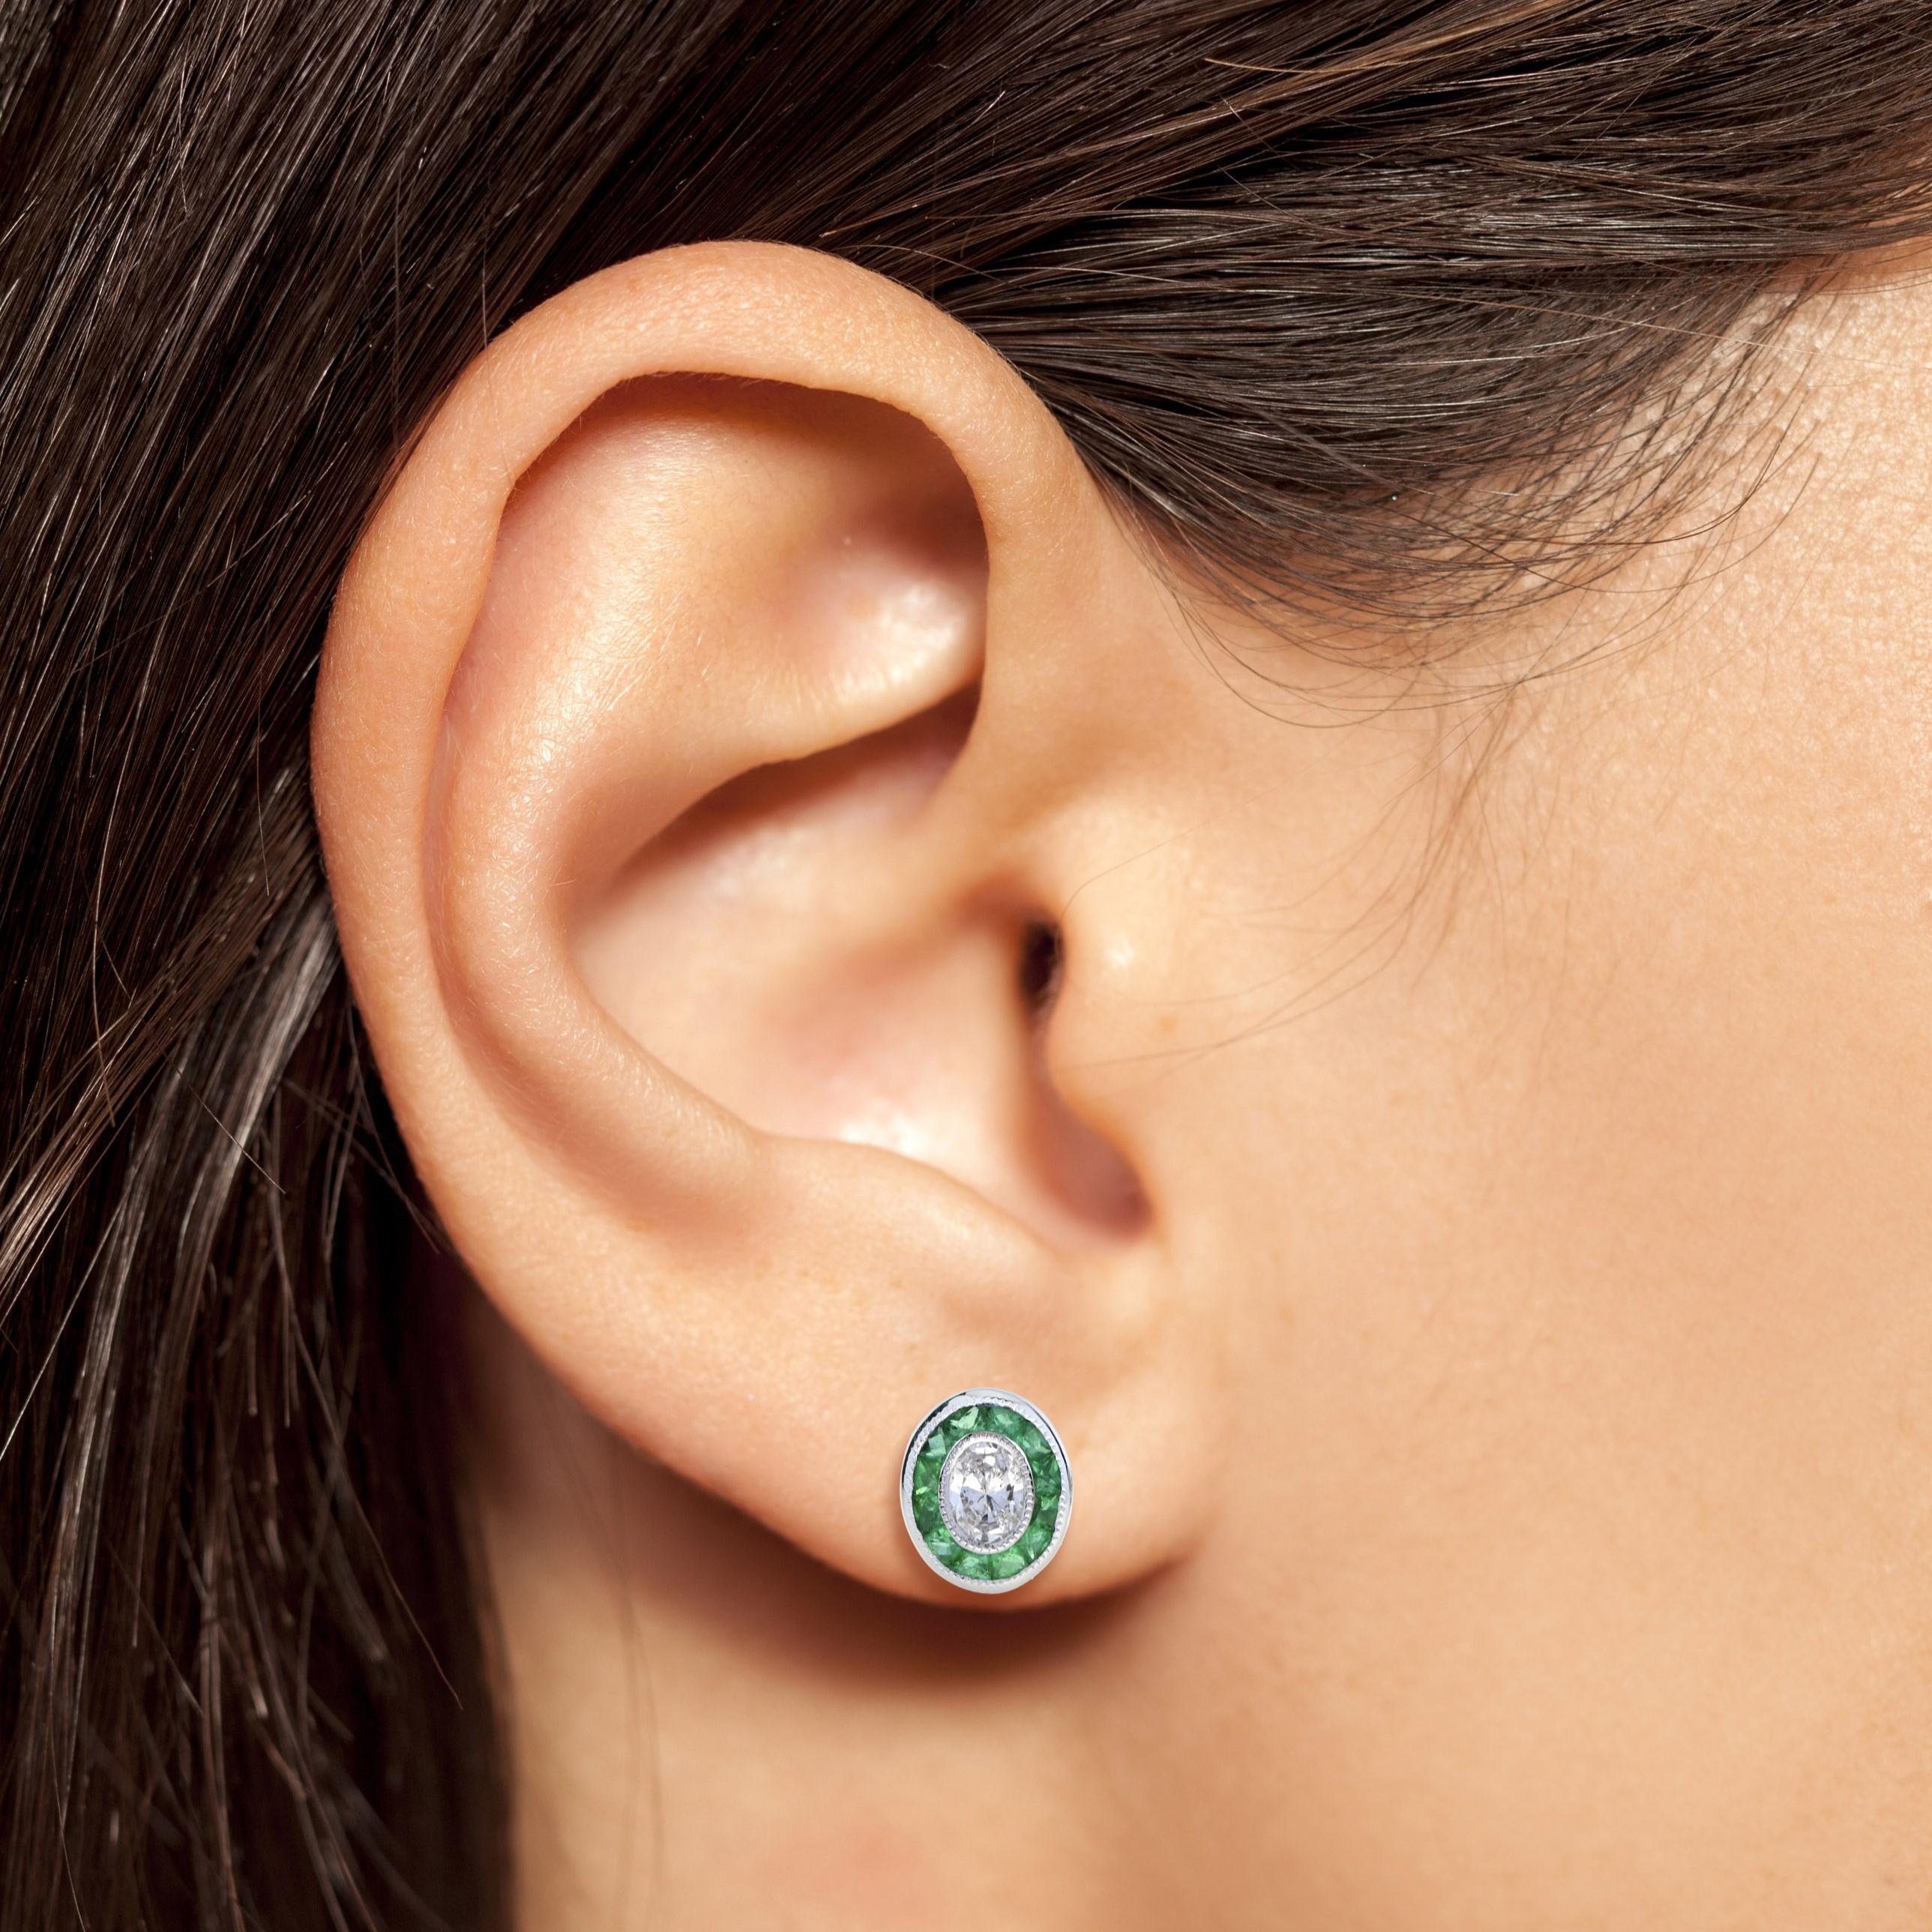 These Art-Deco stud earrings are completely spectacular! The vibrant green emerald is a specialty cut to surround the excellent oval cut center diamond, which is in a thin bezel with millgrain detail. Crafted in 18k white gold.

Earrings